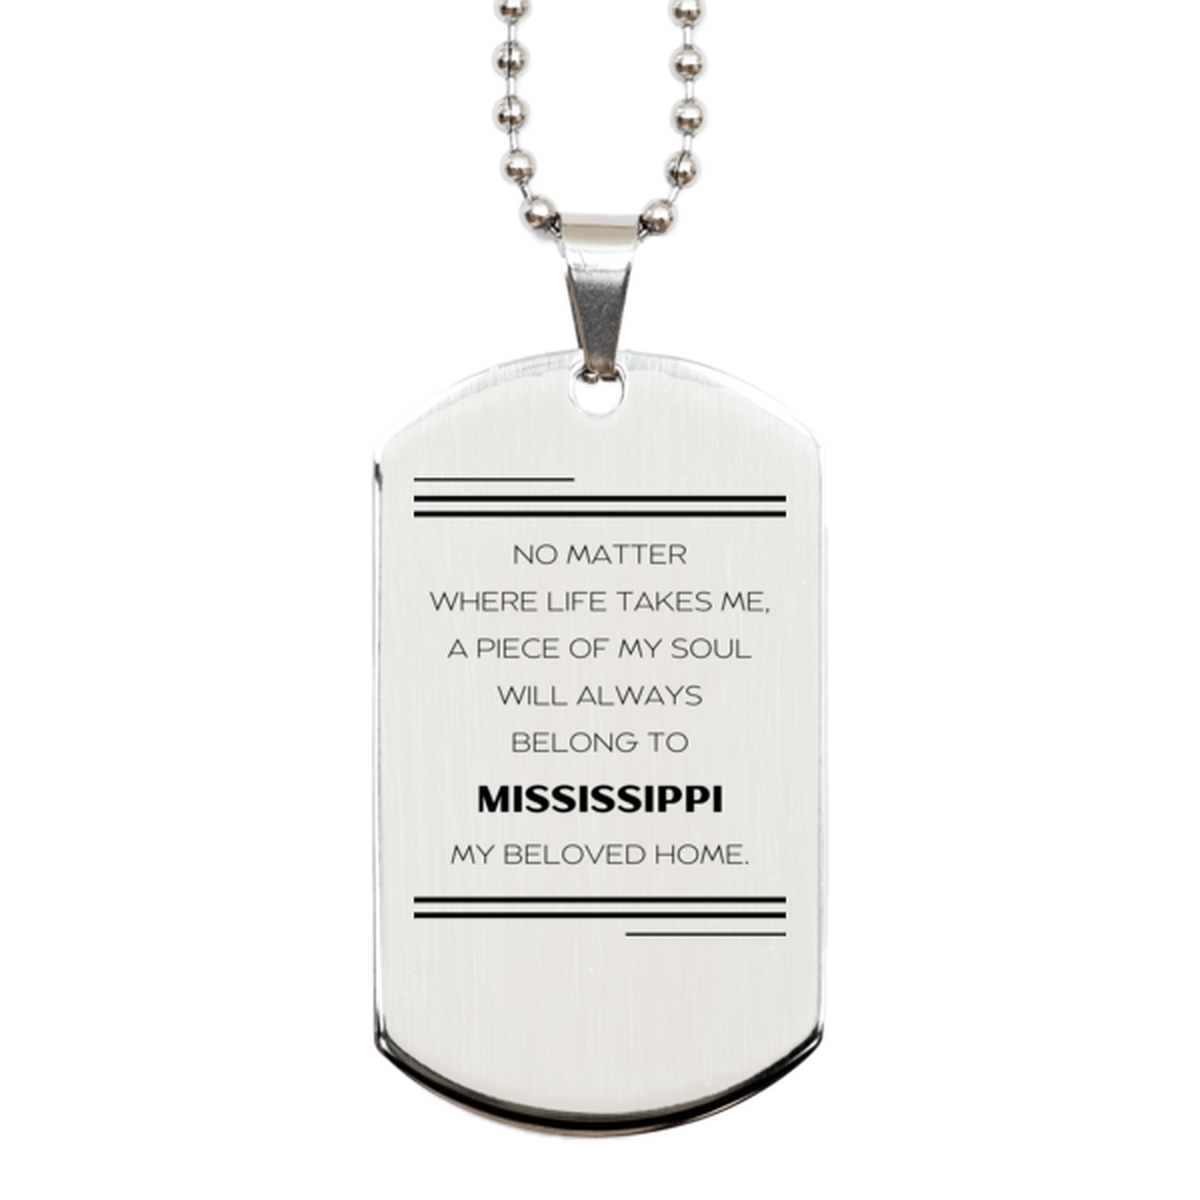 Love Mississippi State Gifts, My soul will always belong to Mississippi, Proud Silver Dog Tag, Birthday Unique Gifts For Mississippi Men, Women, Friends